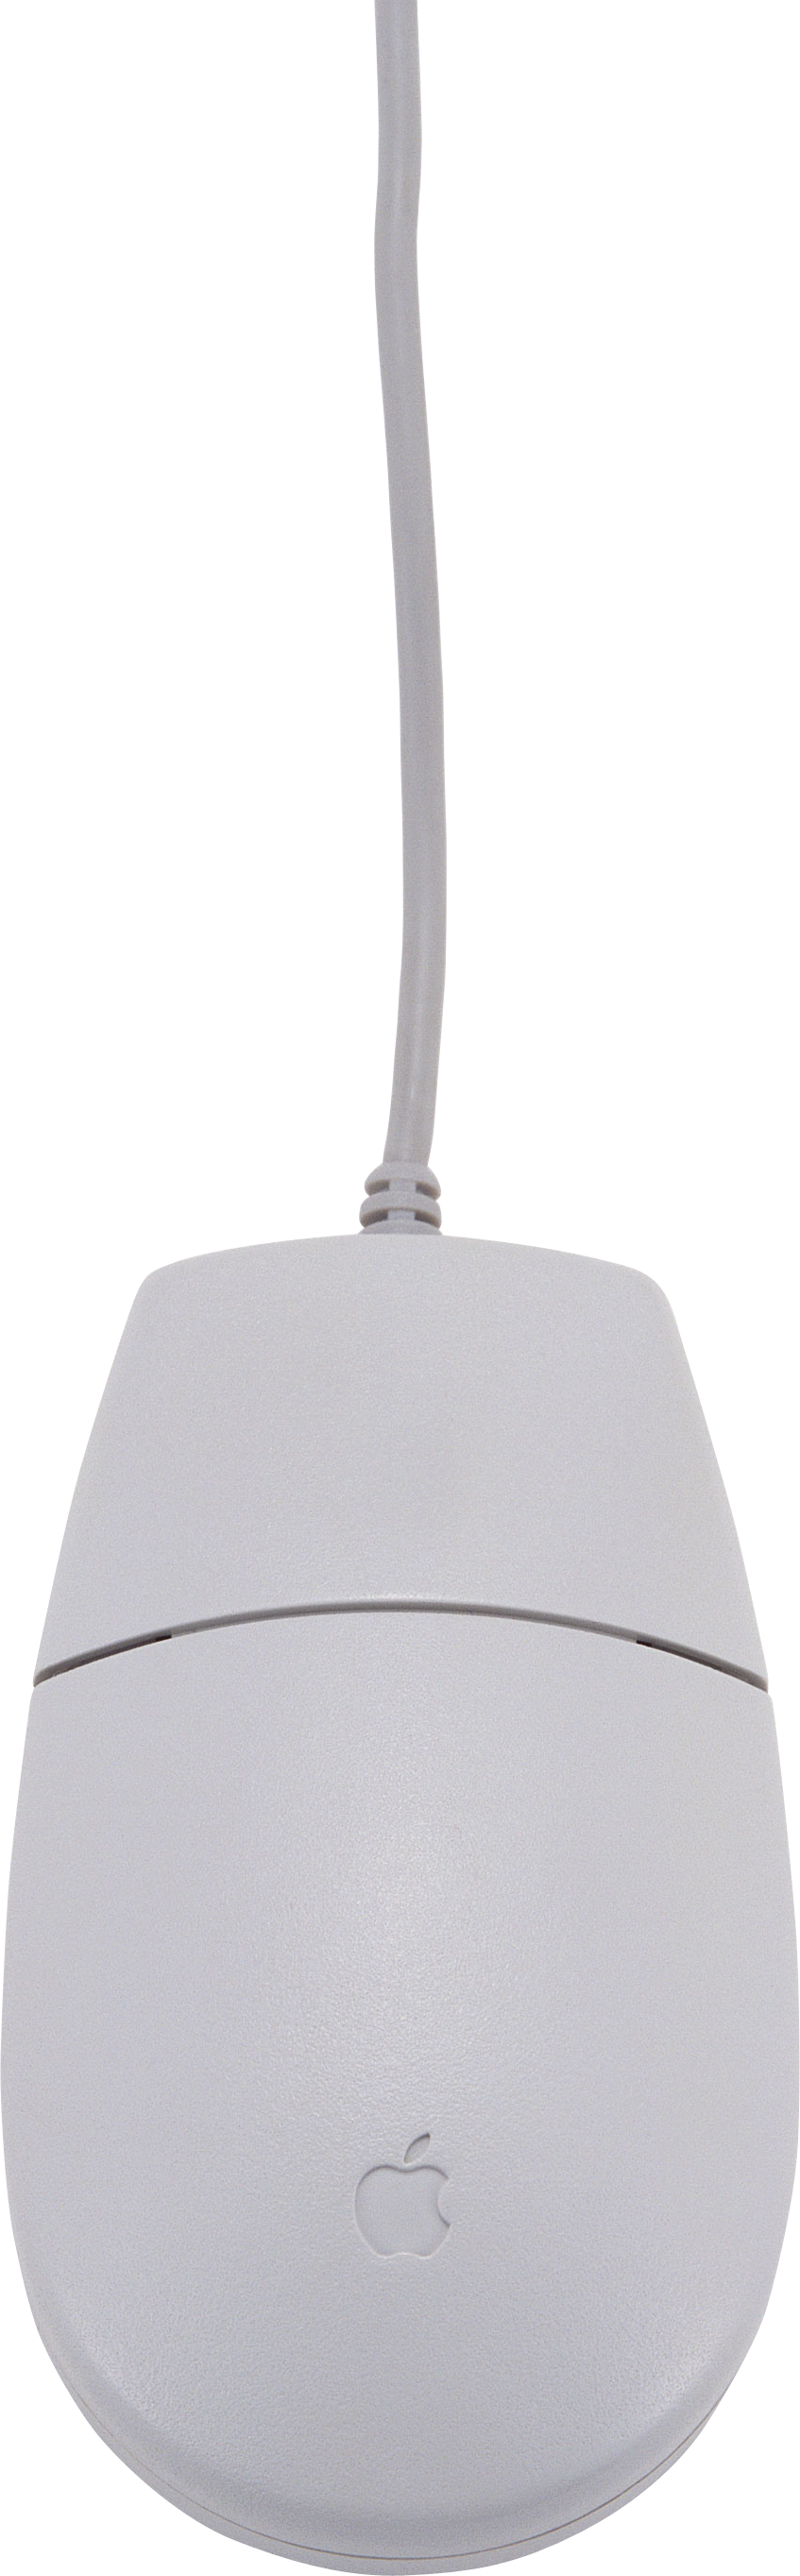 White Apple Computer Mouse